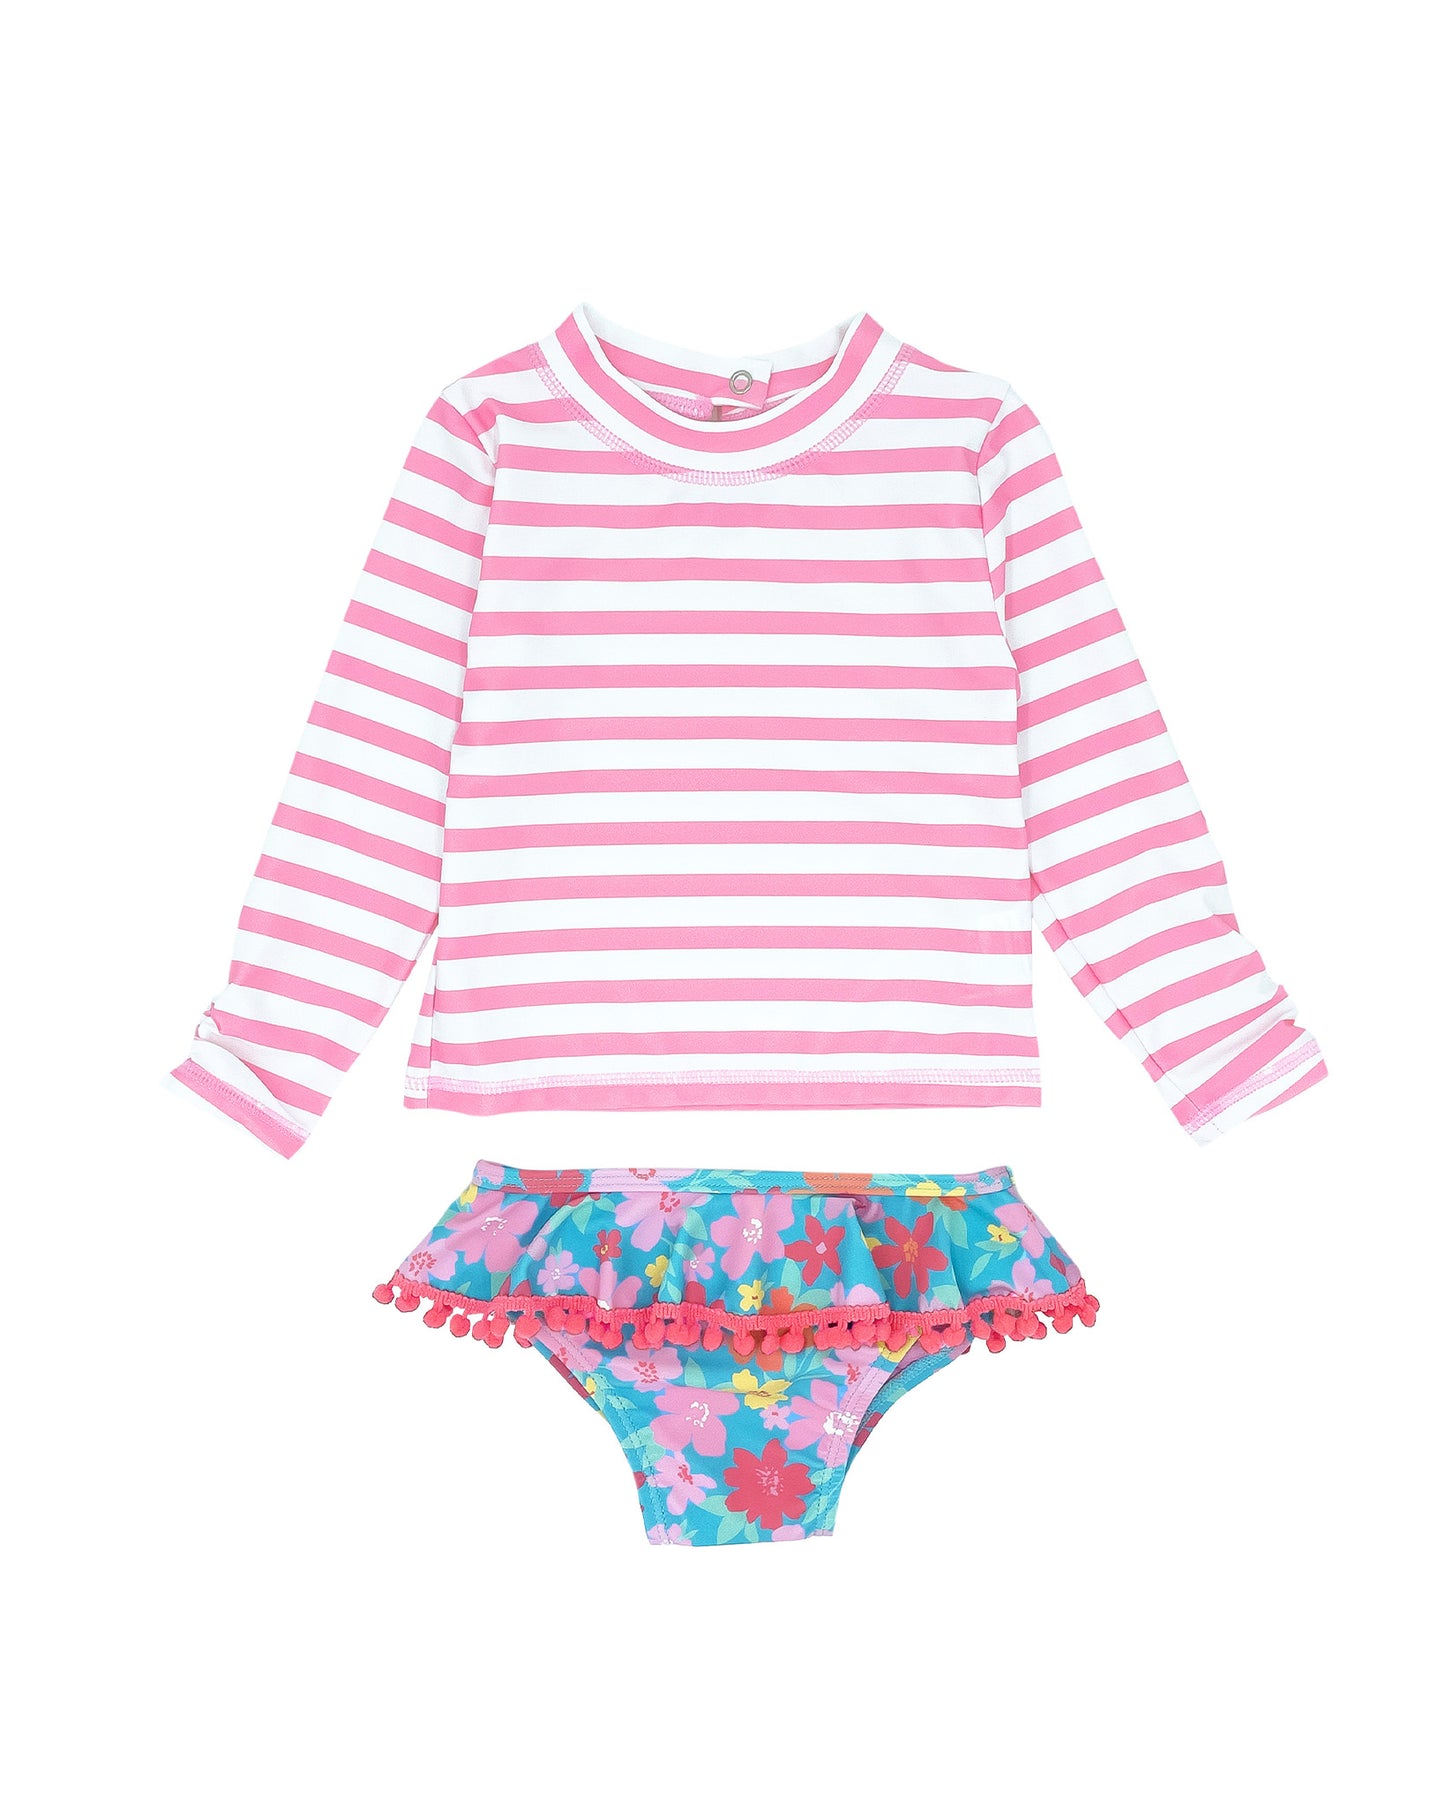 Sandy Toes Baby Swimsuit